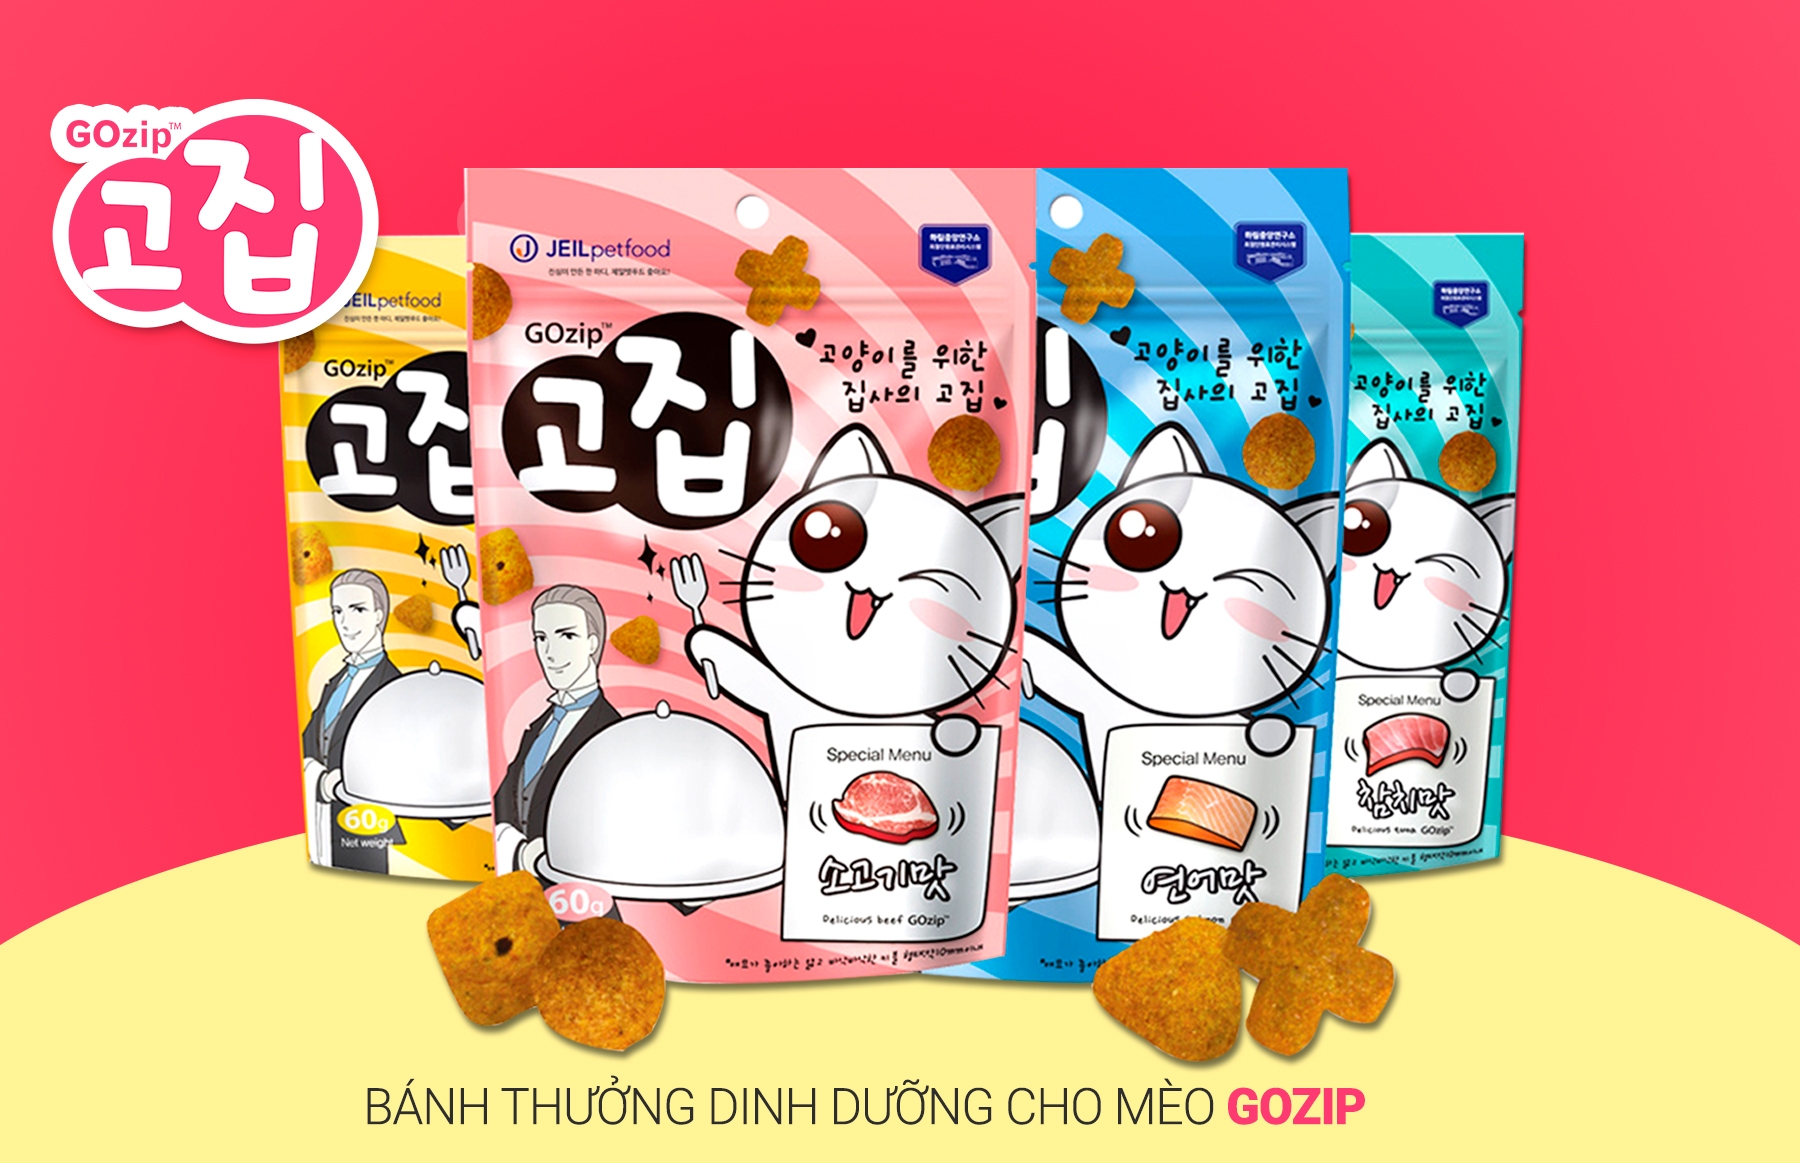 gozip-banh-thuong-dinh-duong-danh-cho-meo